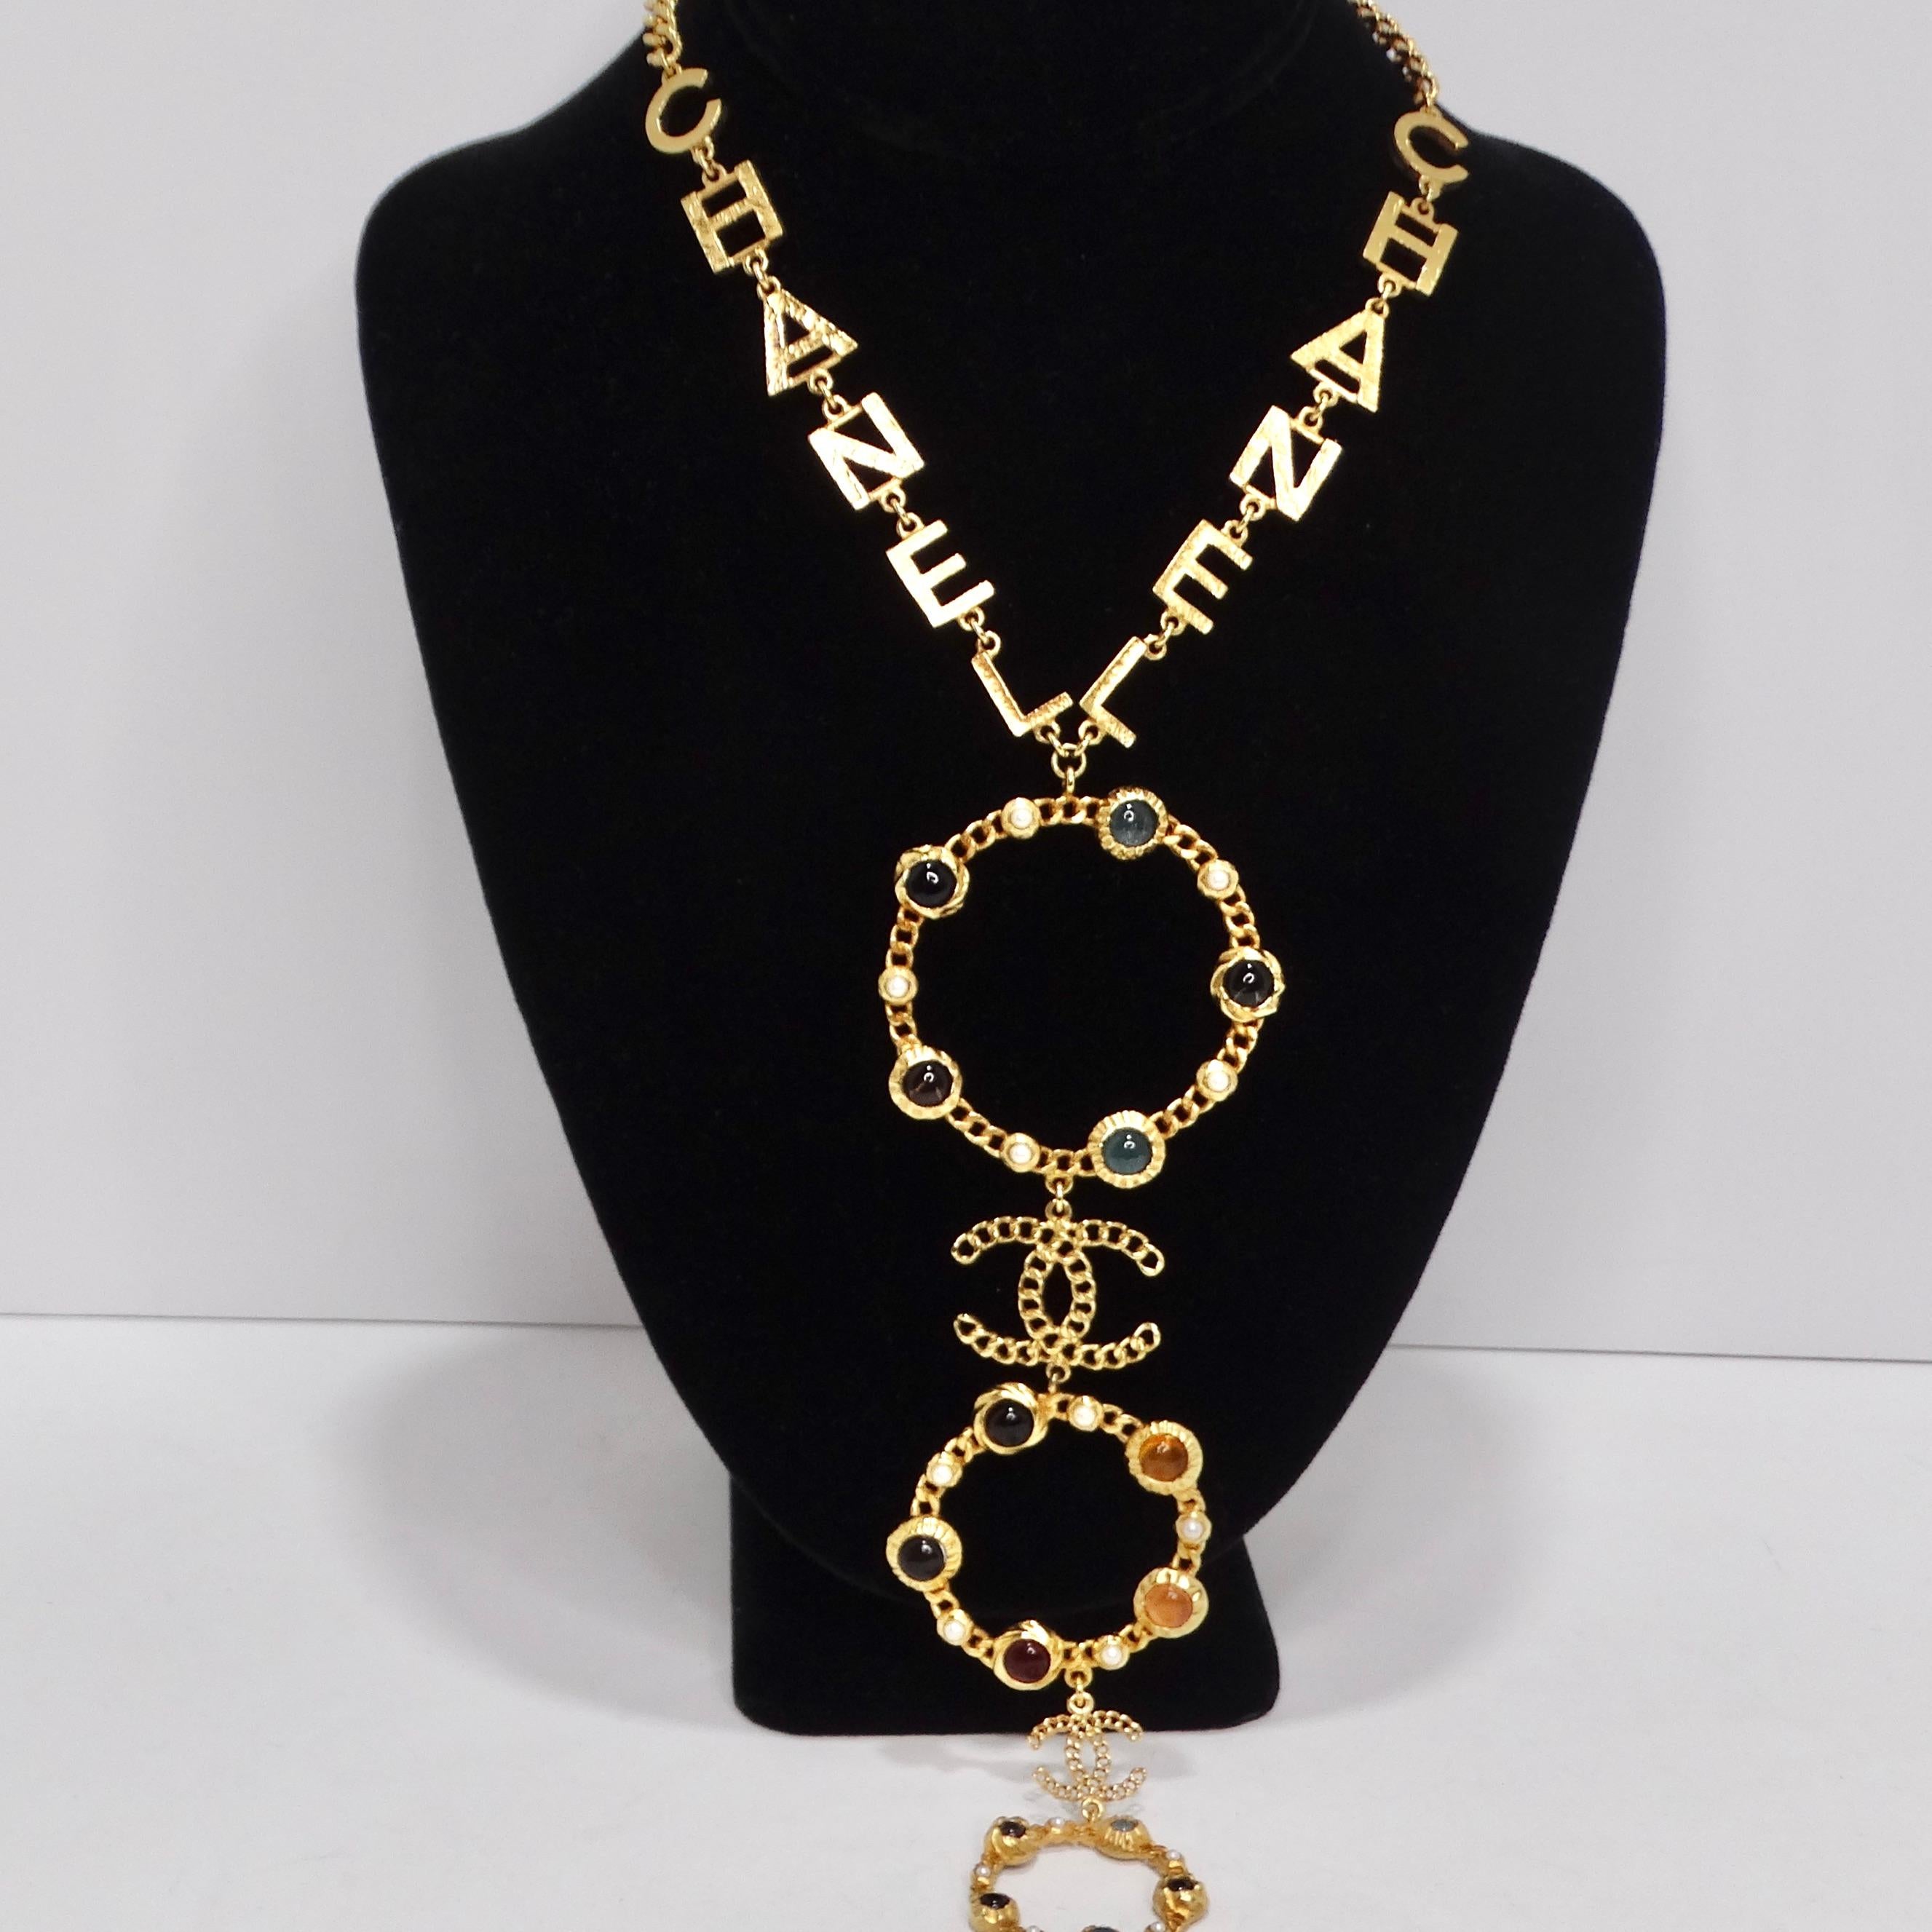 Chanel 18K Gold Plated Logo Multi Gemstone Lariat Necklace In Excellent Condition For Sale In Scottsdale, AZ